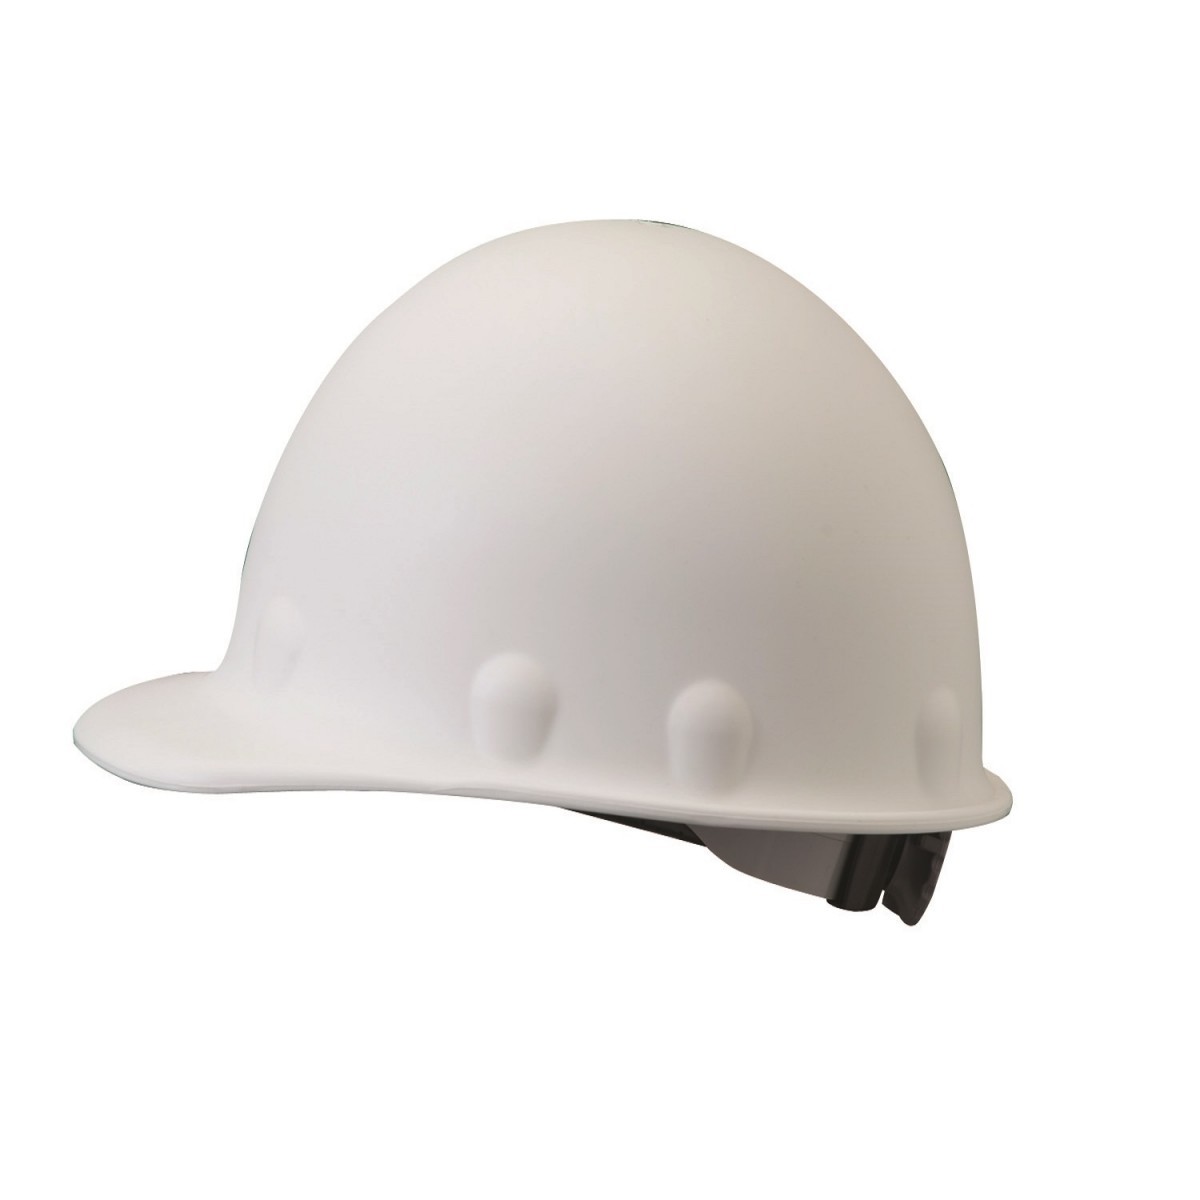 shop honeywell safety products online at autumn supply